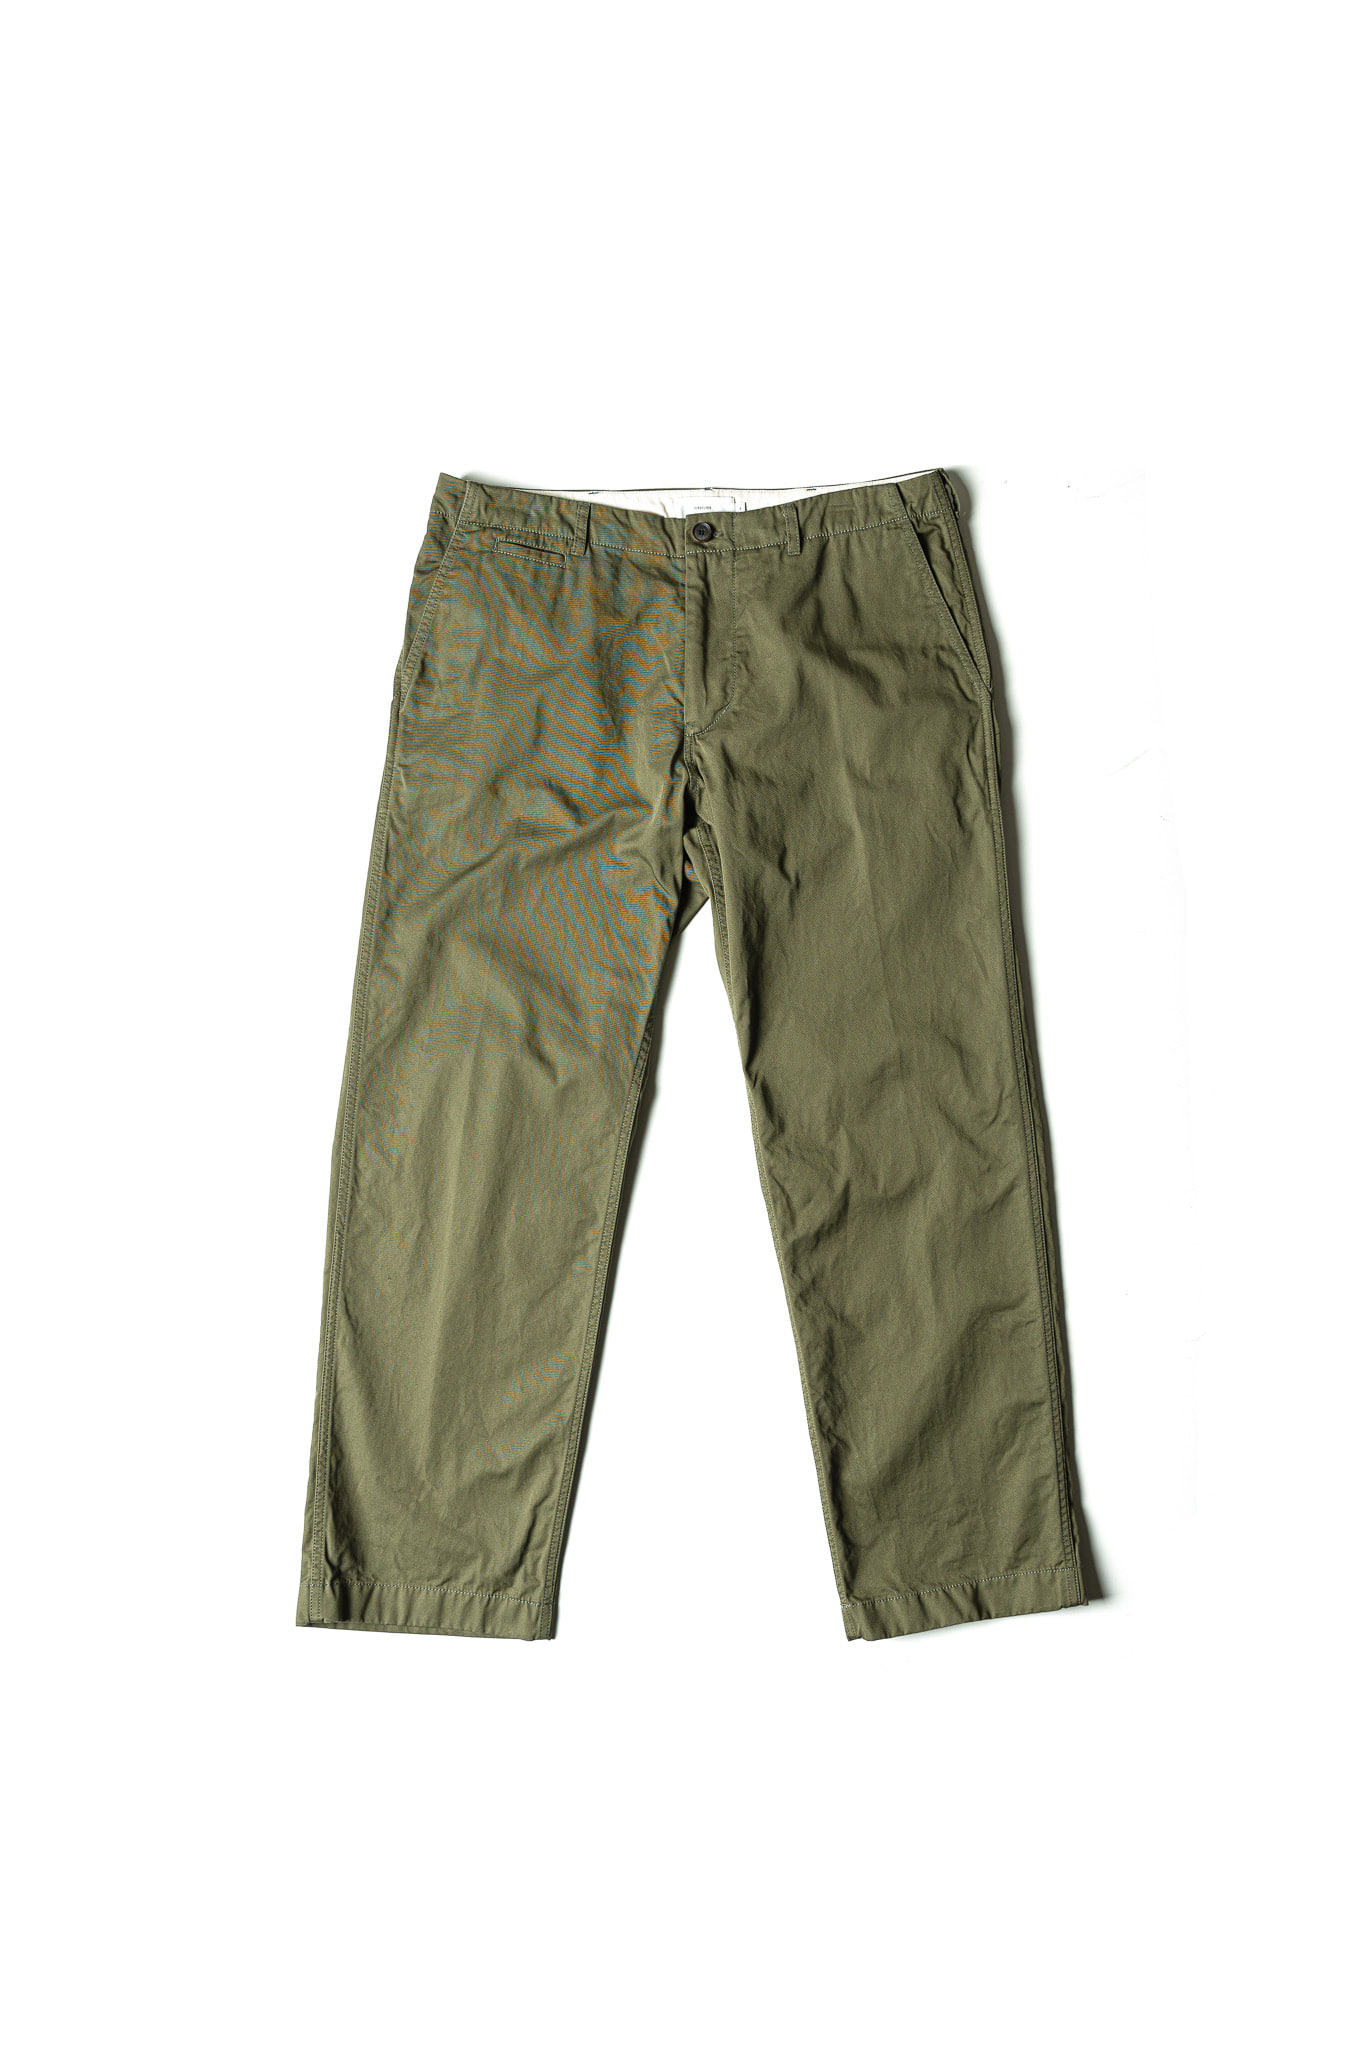 VINTAGE COTTON RELAXED CHINO PANTS (olive)